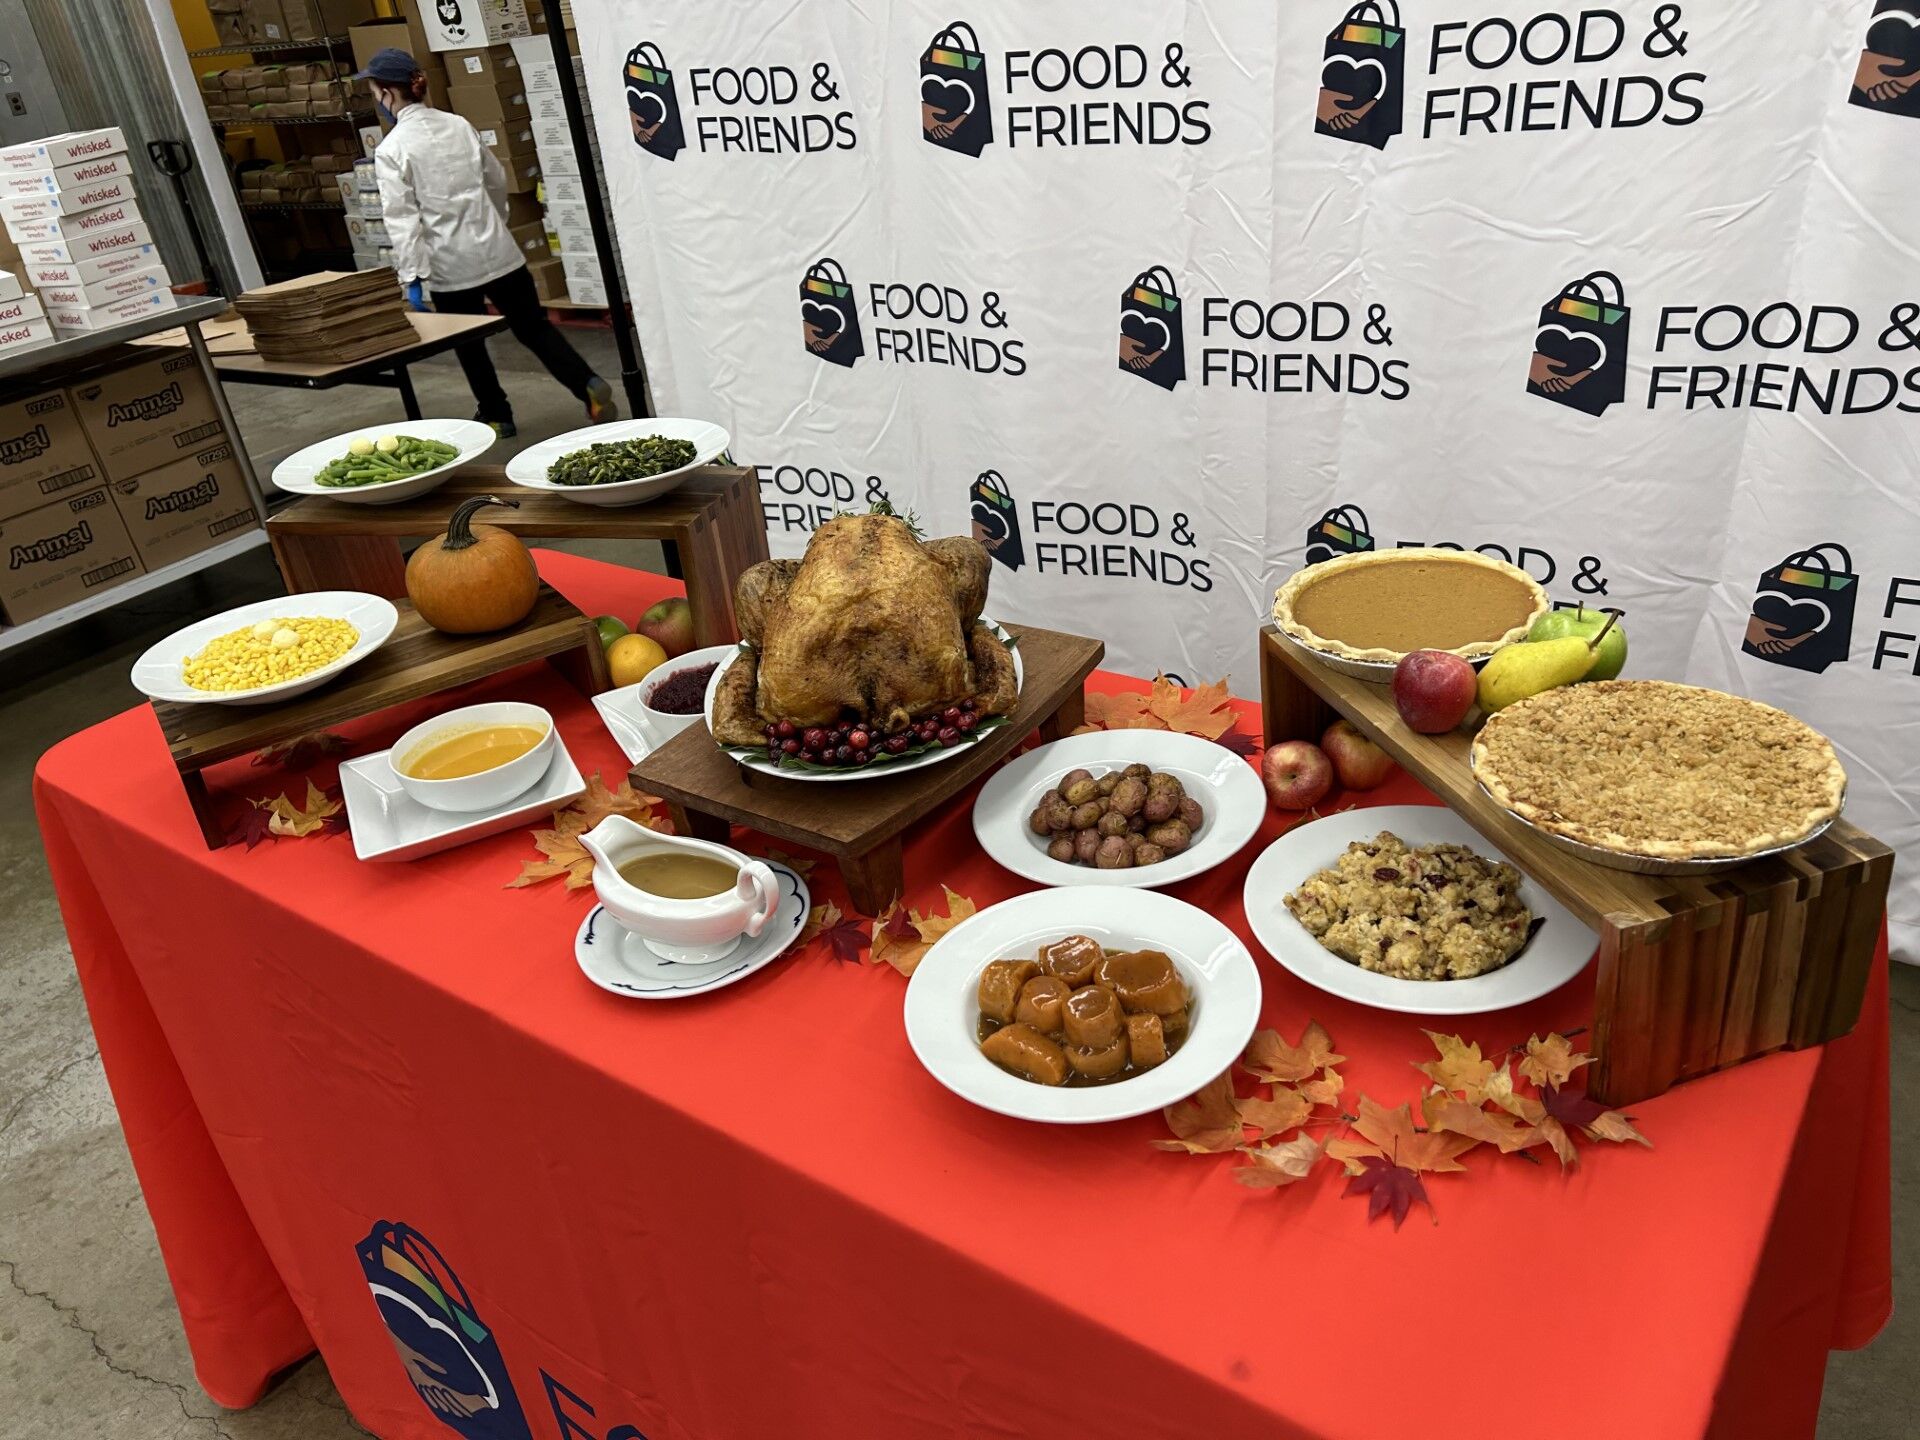 ‘Food is medicine here’: Food & Friends prepares Thanksgiving meals for neighbors with life-challenging illnesses